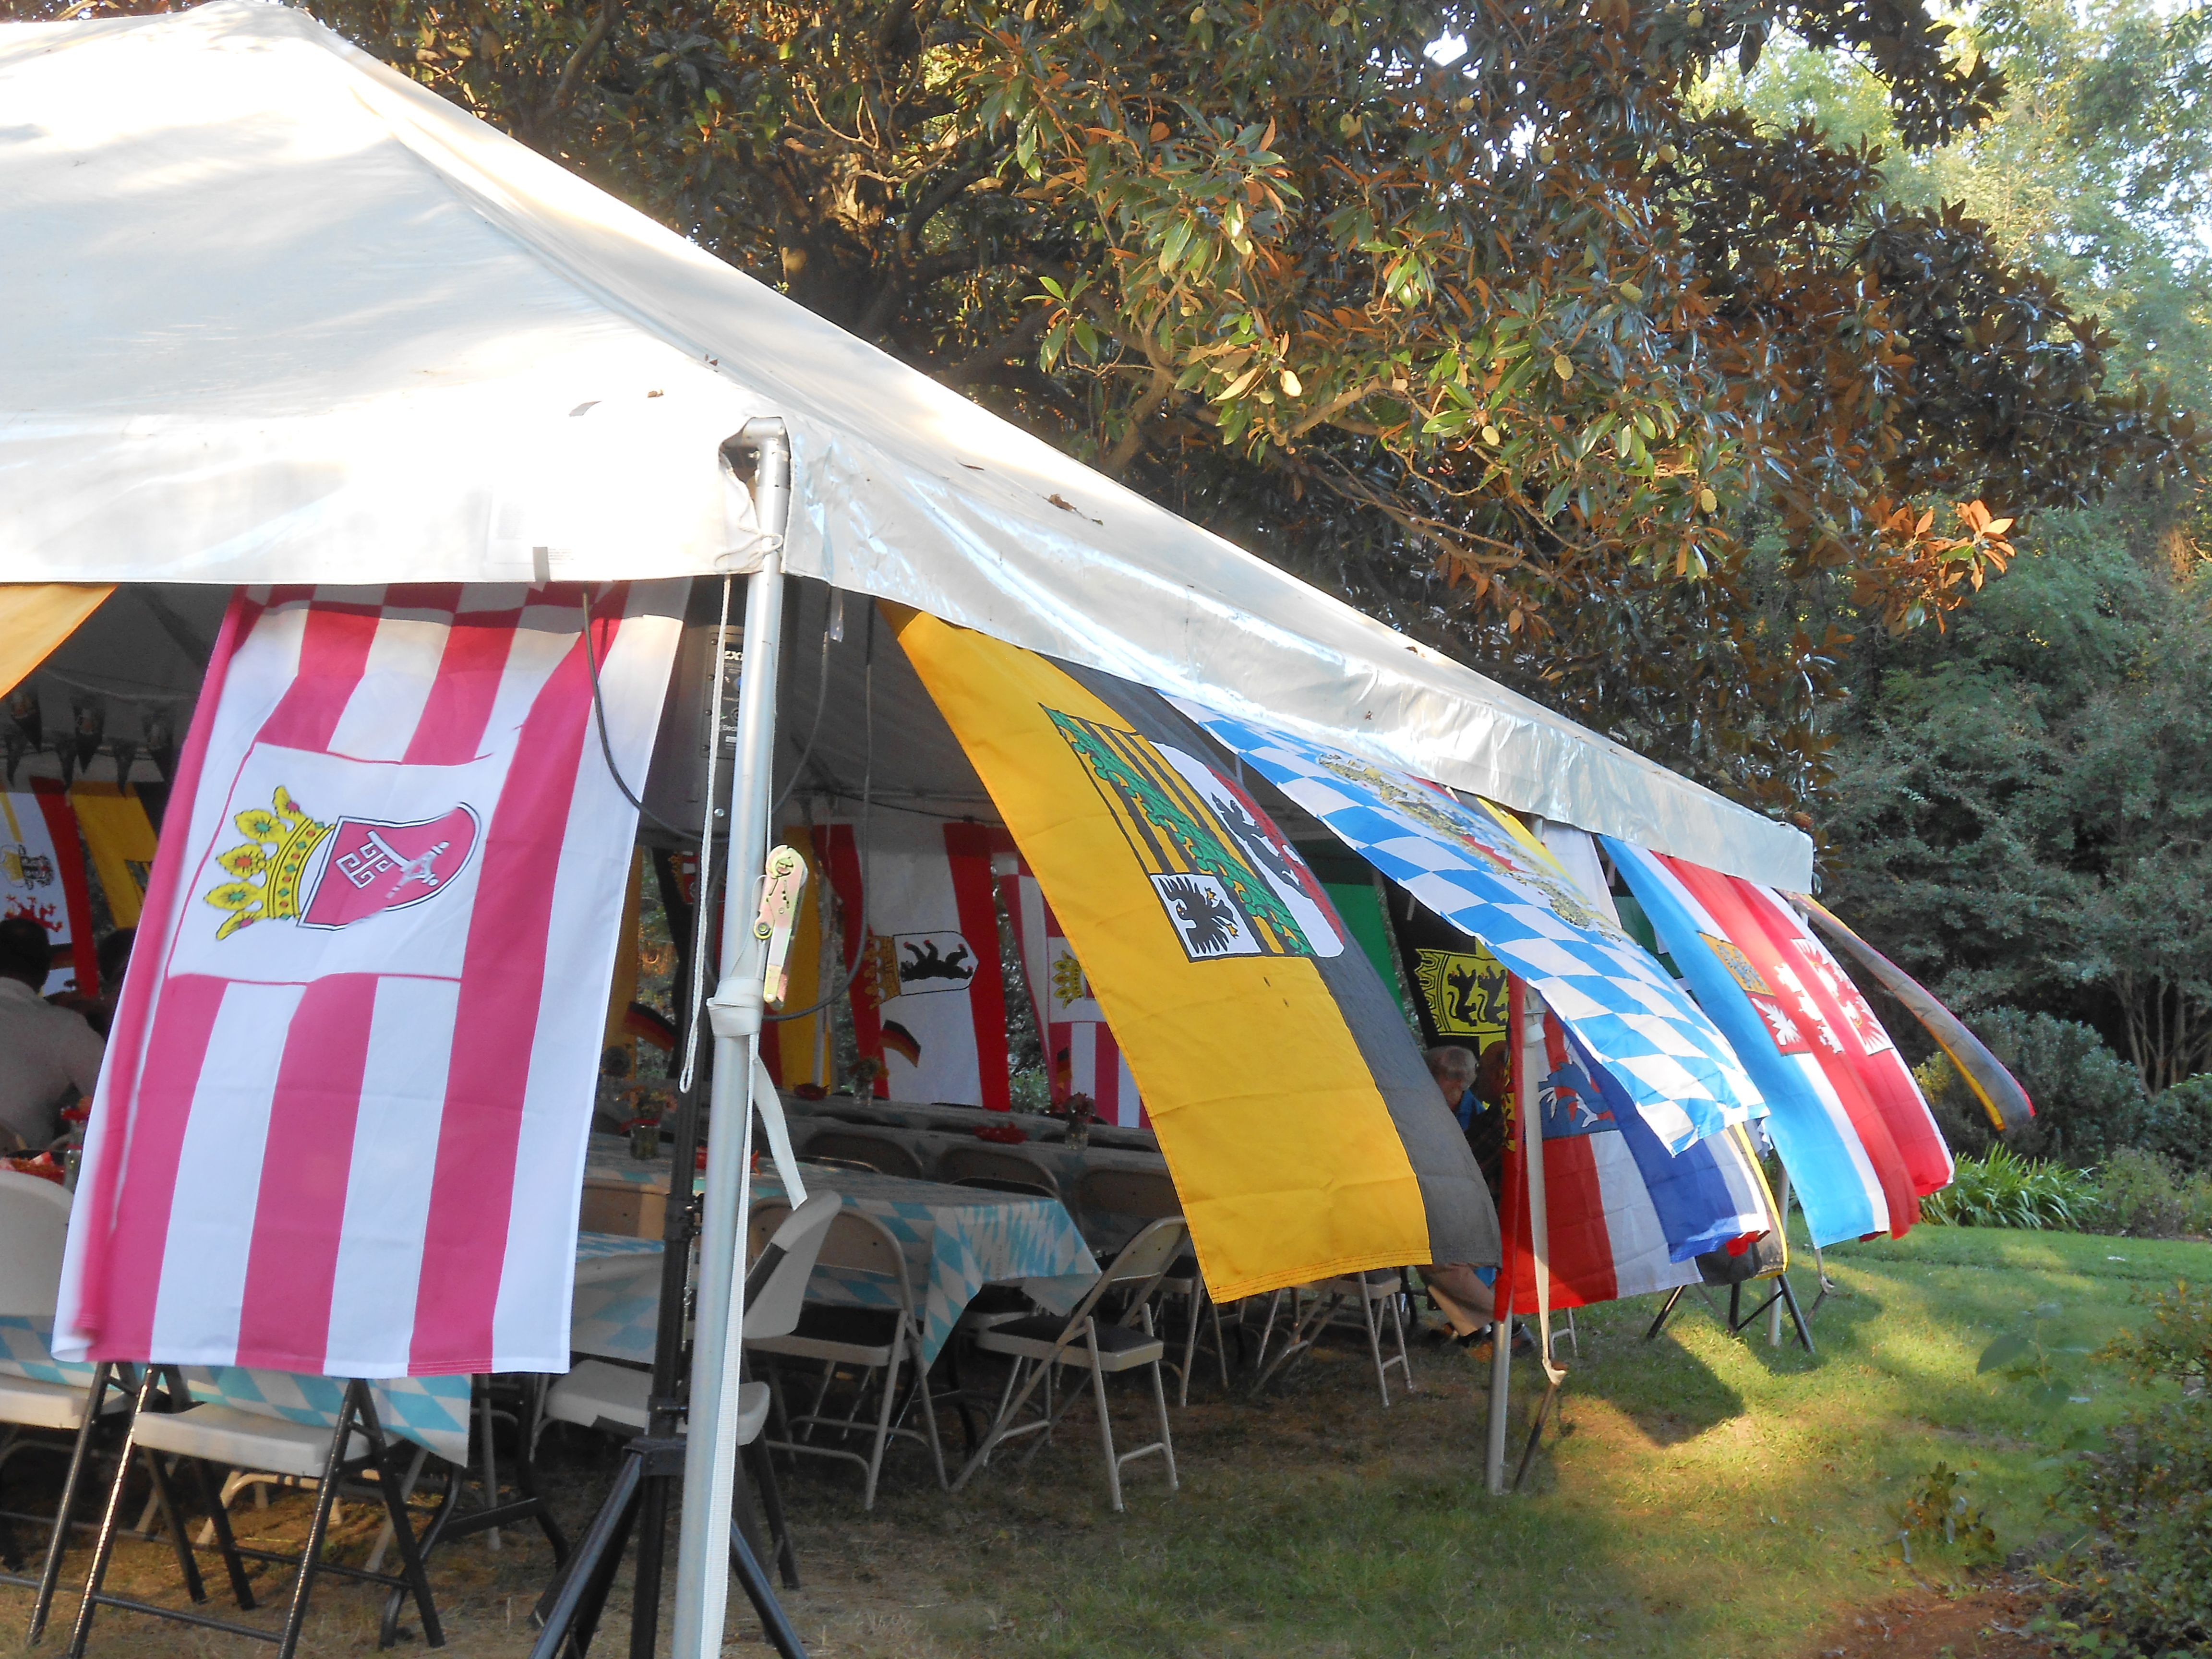 German flags adorned the tent.